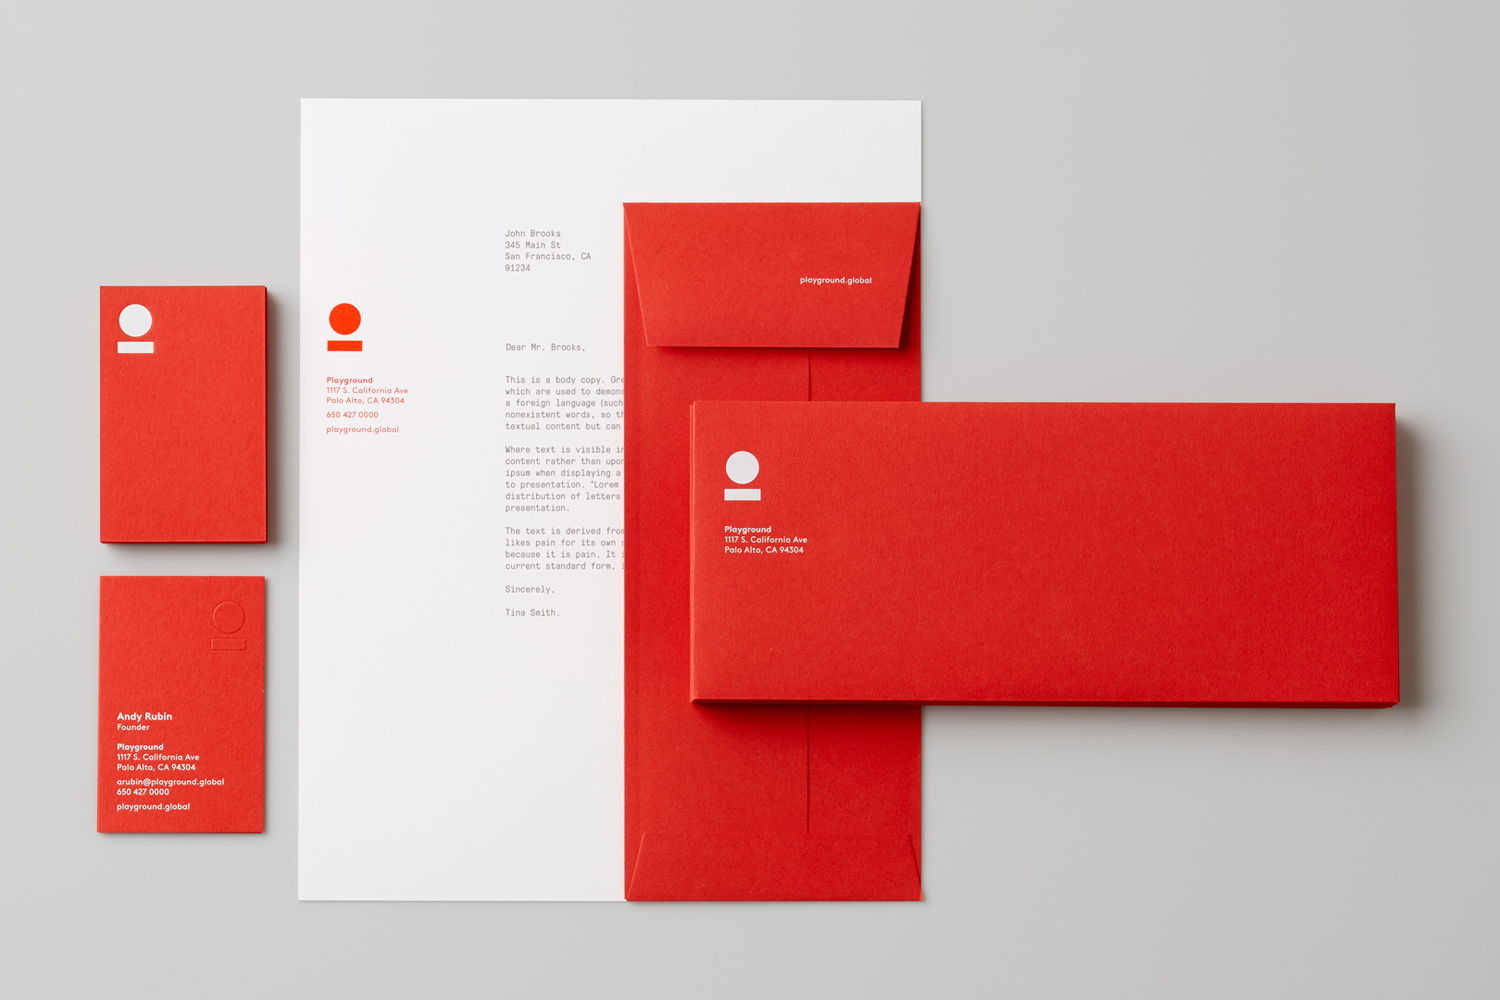 Brand identity and stationery set for venture fund and start-up studio Playground by Character